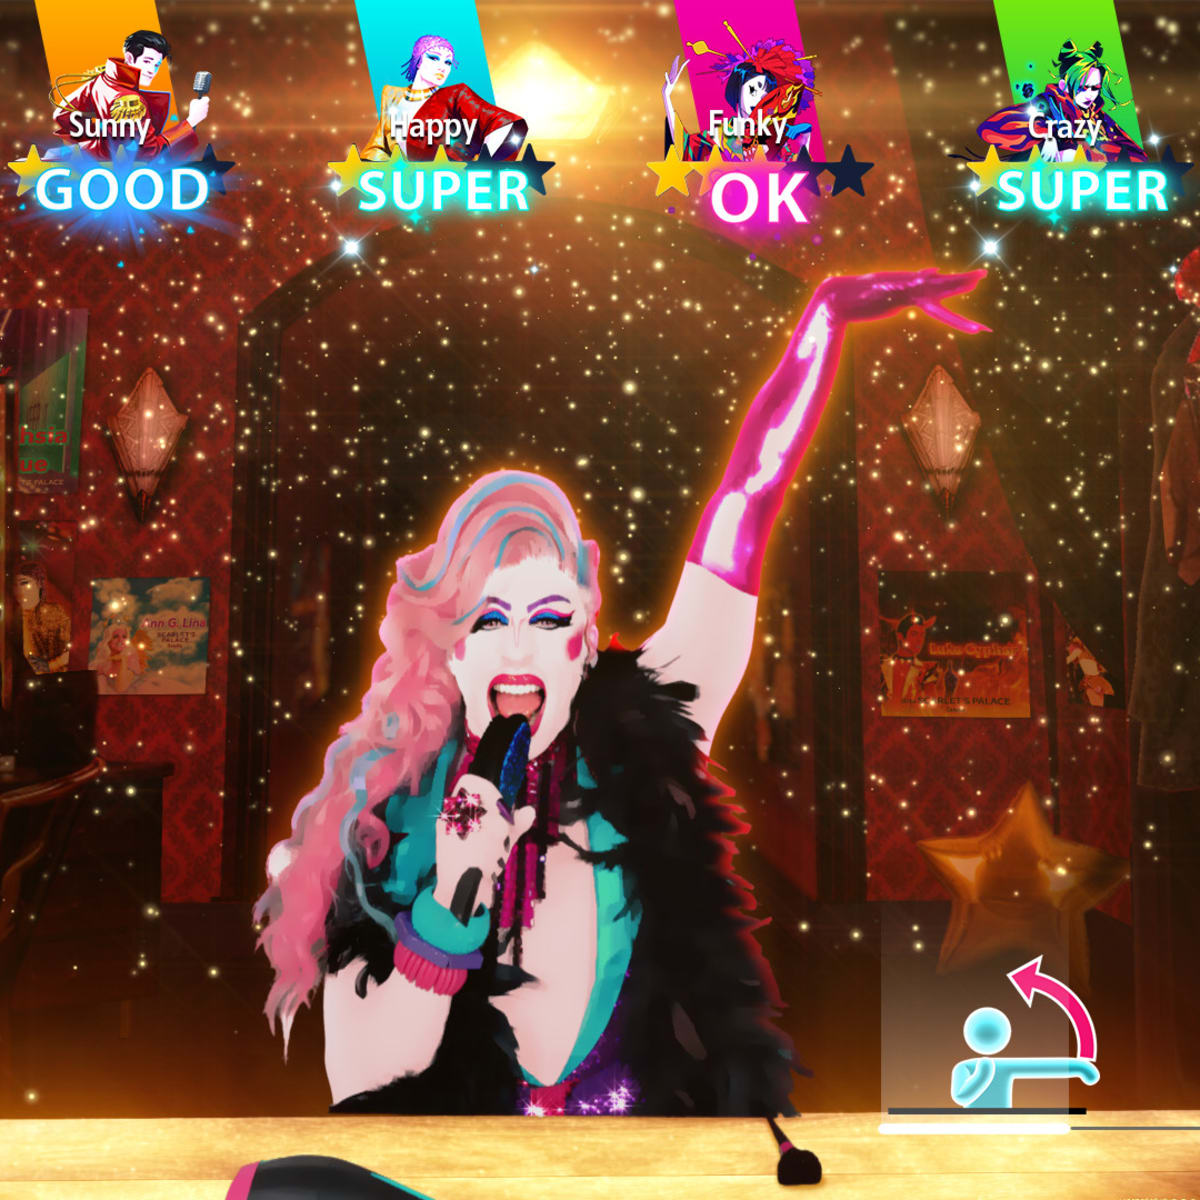 Just Dance 2024 - everything we know